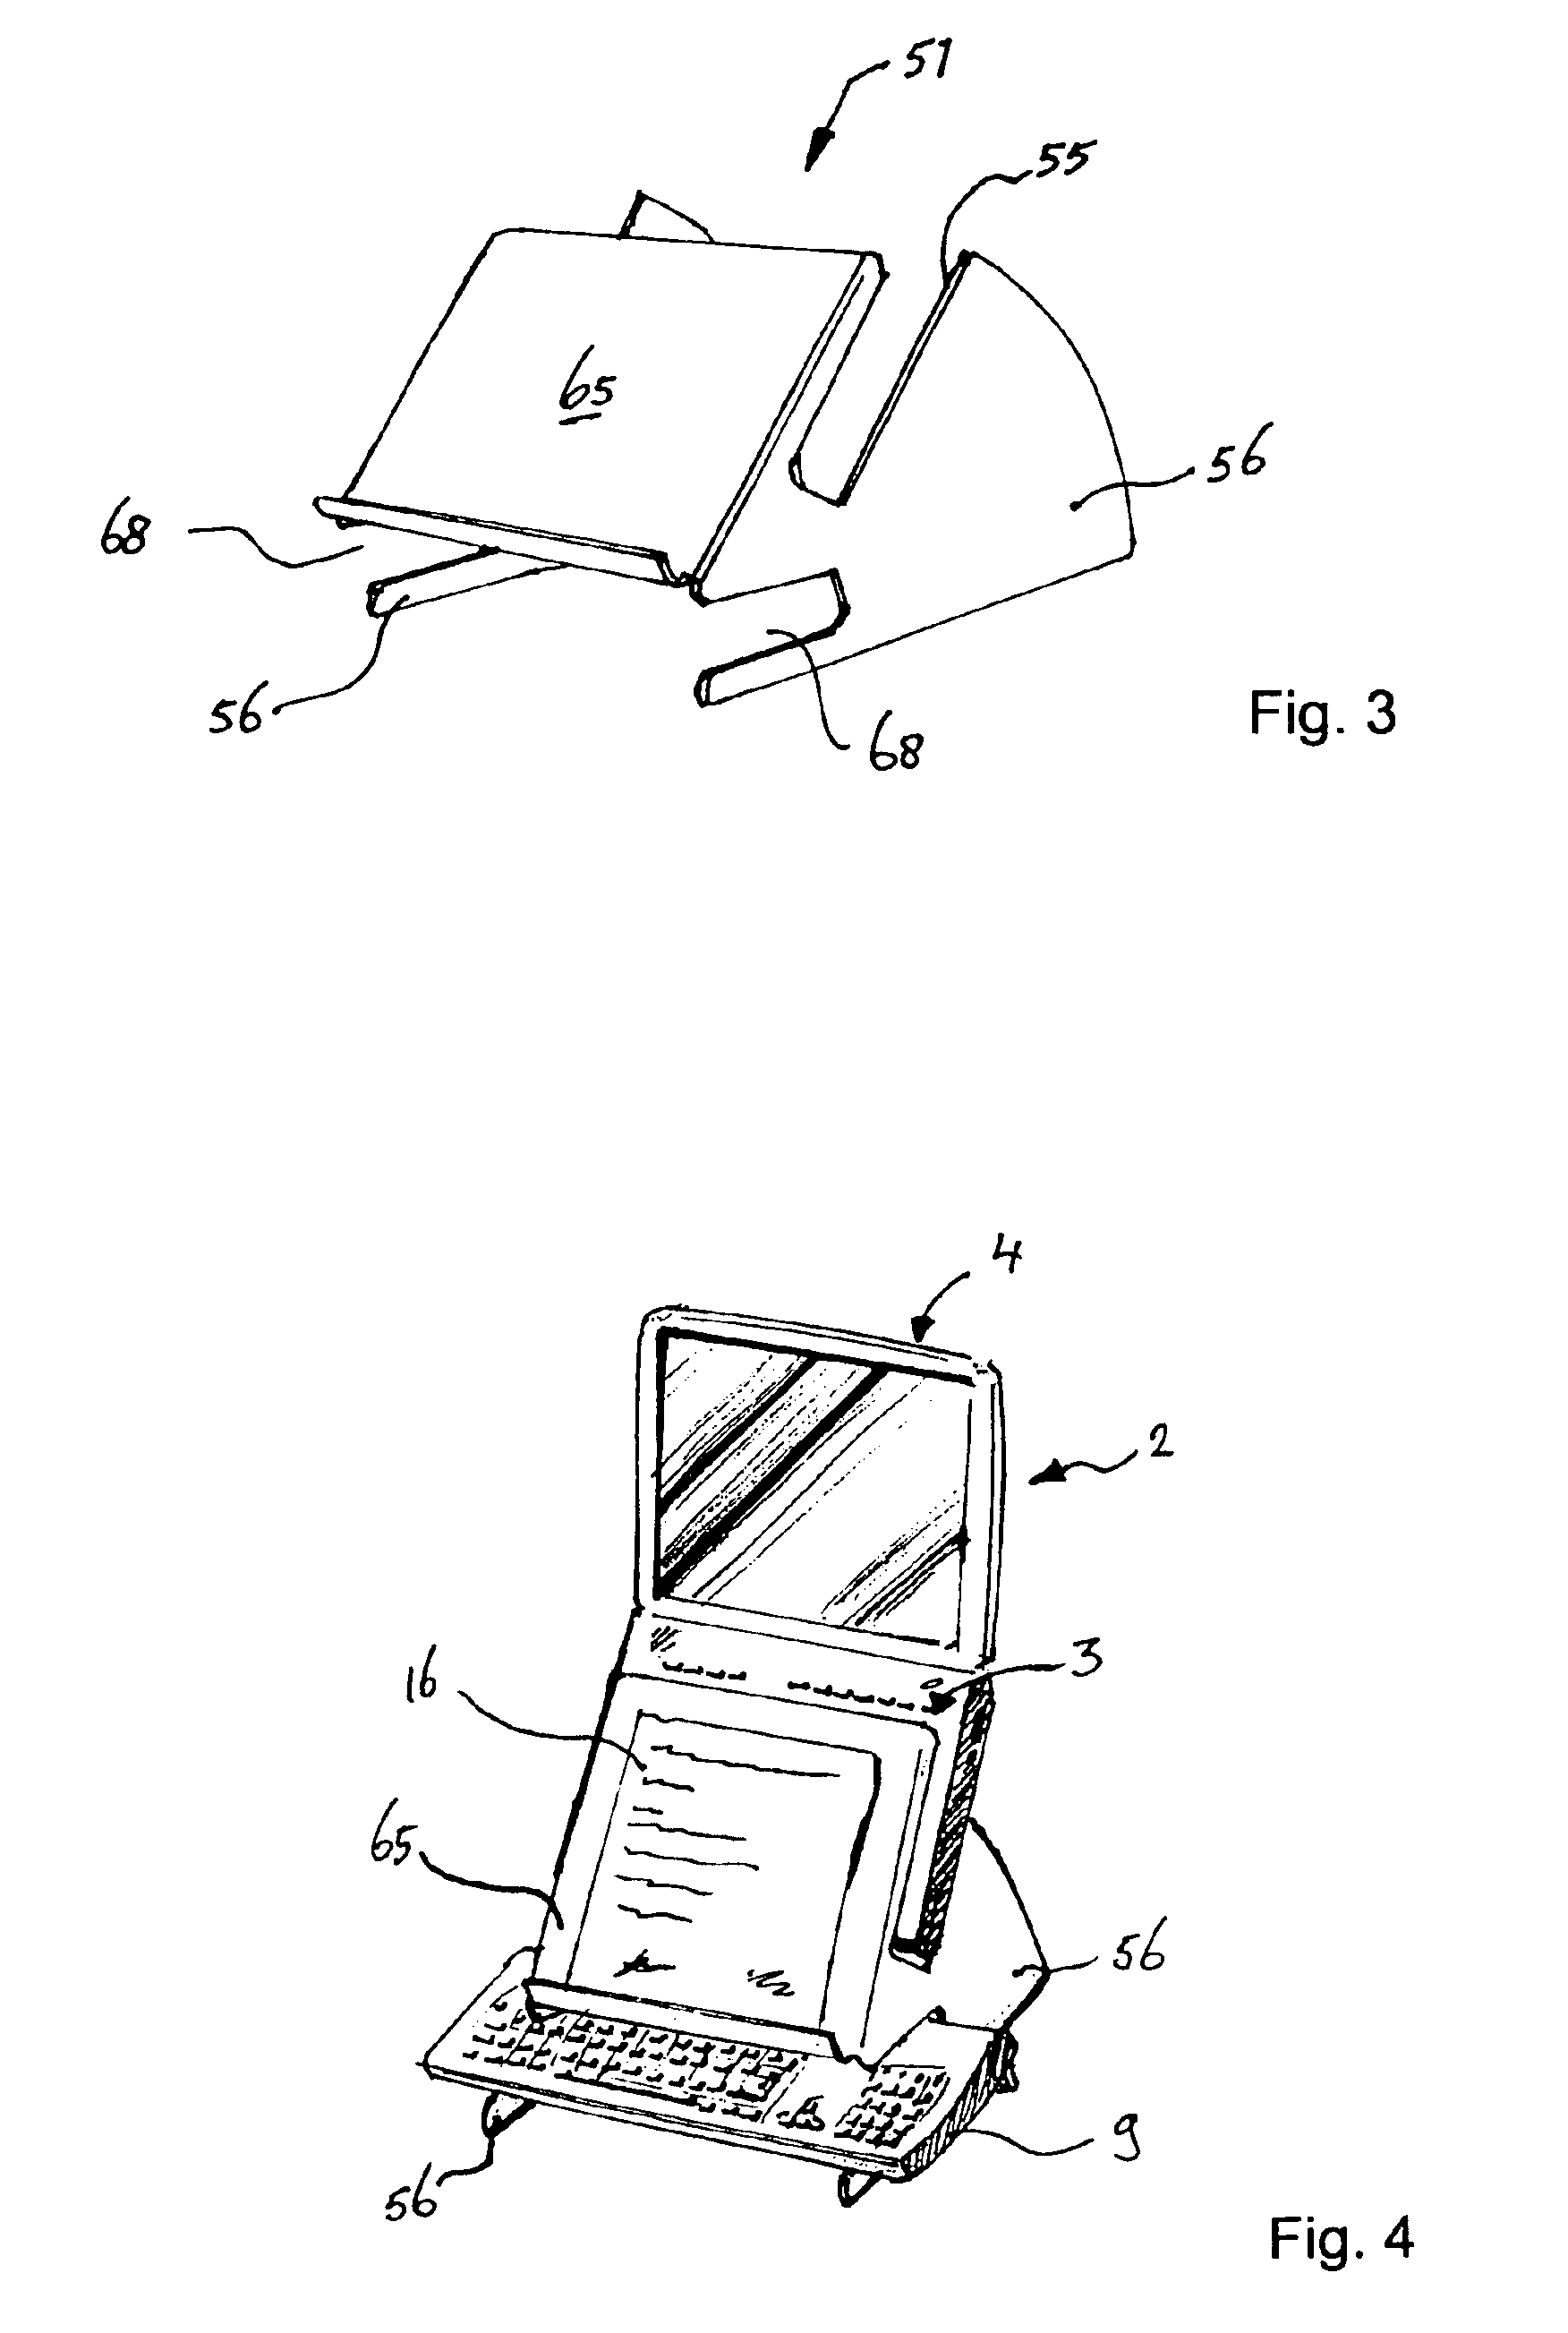 Support for and method for use of a portable computer